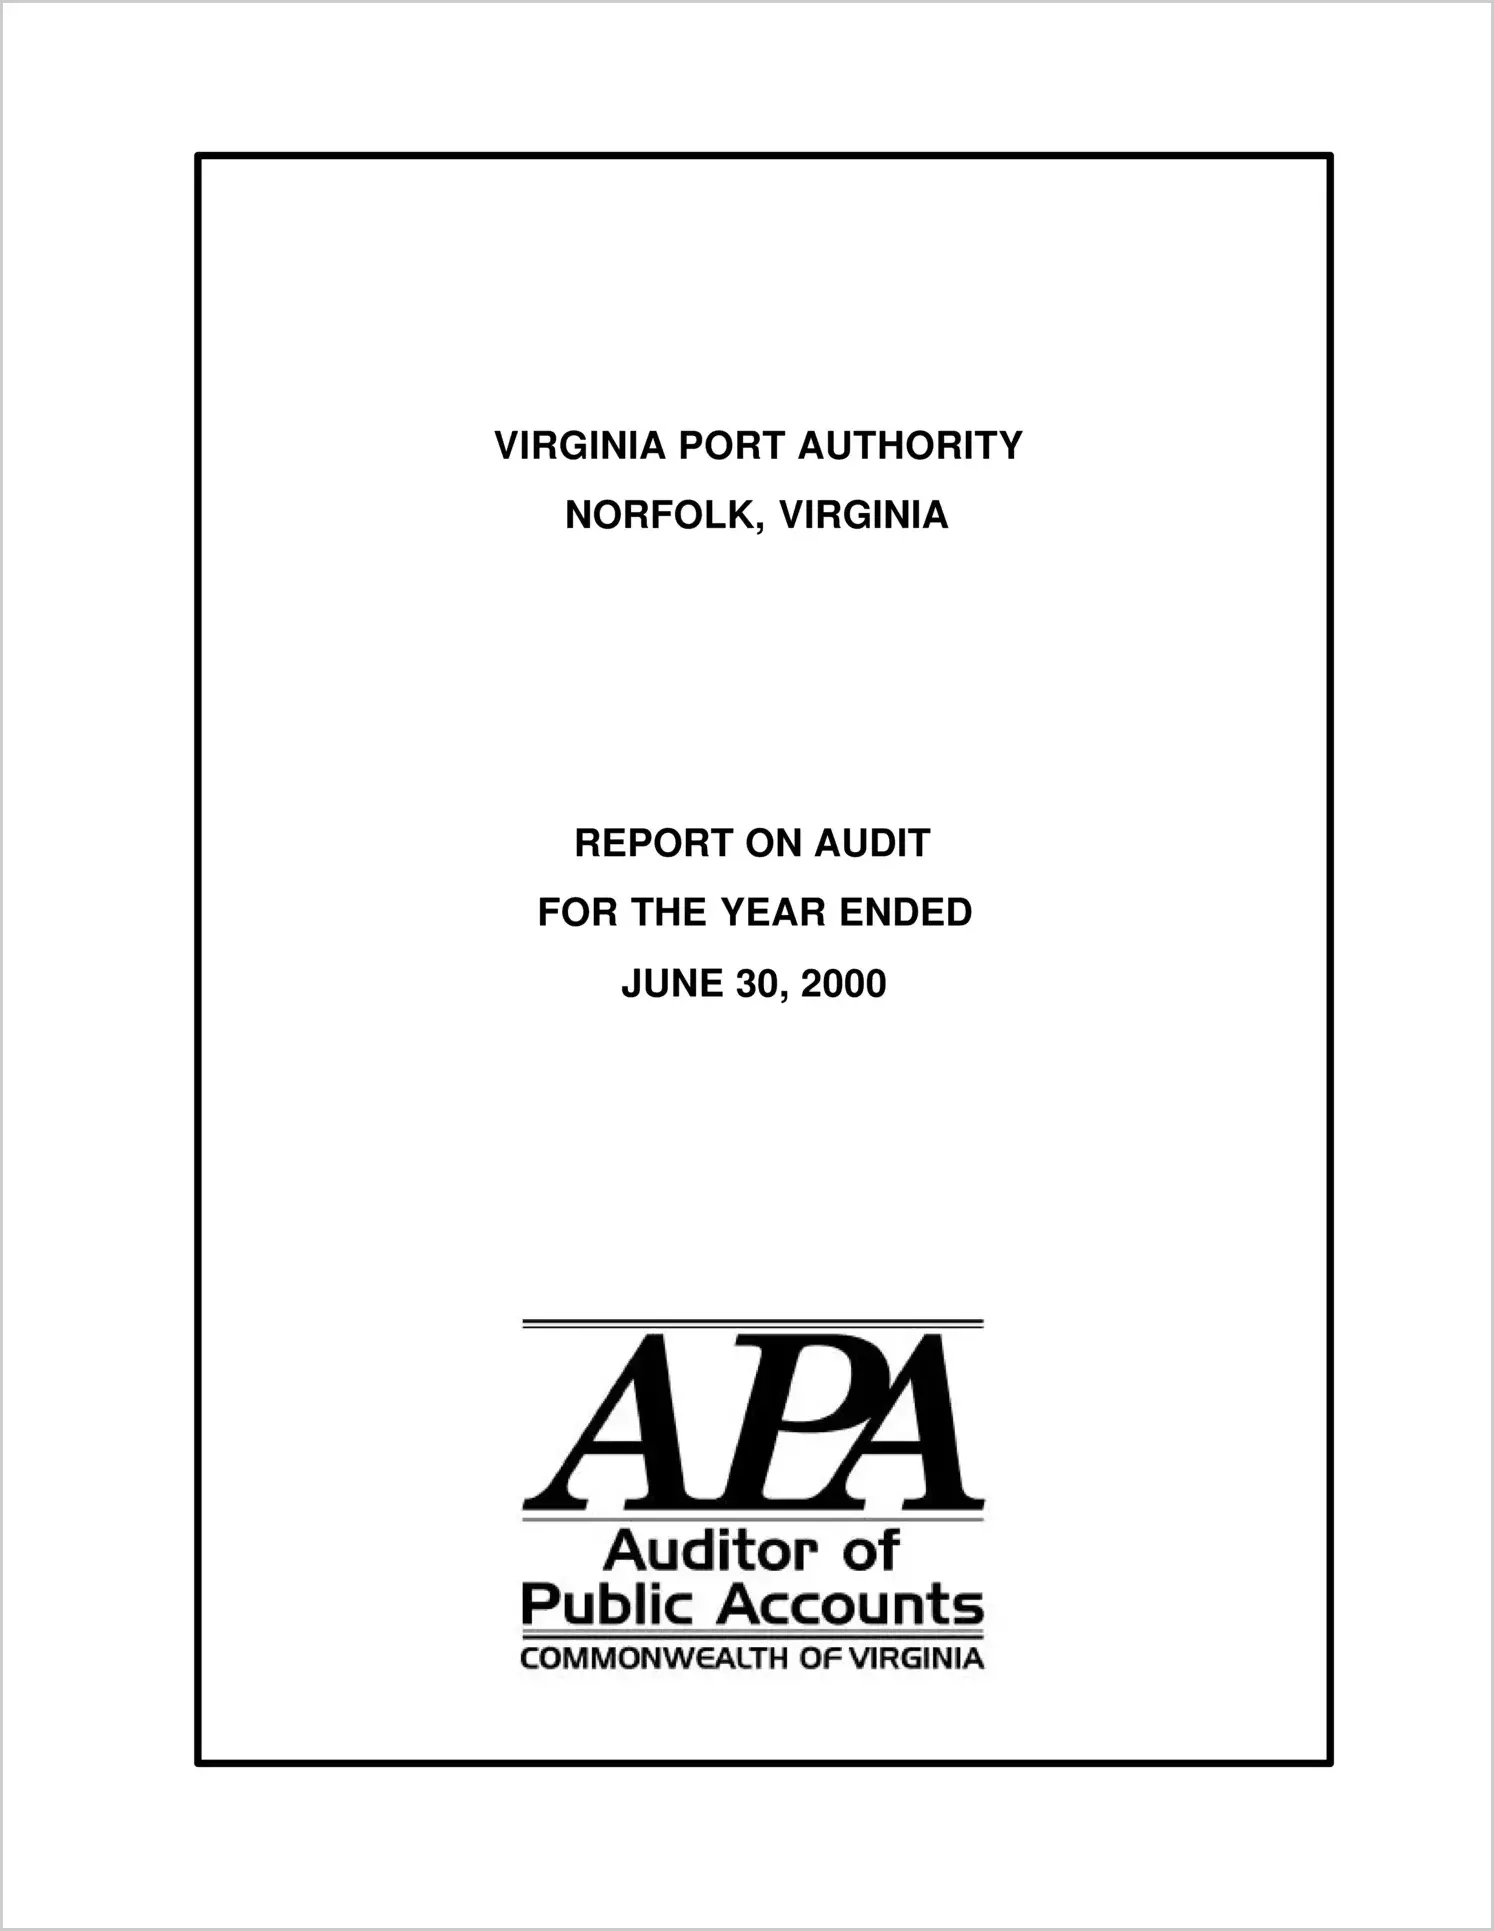 Virginia Port Authority for the year ended June 30, 2000